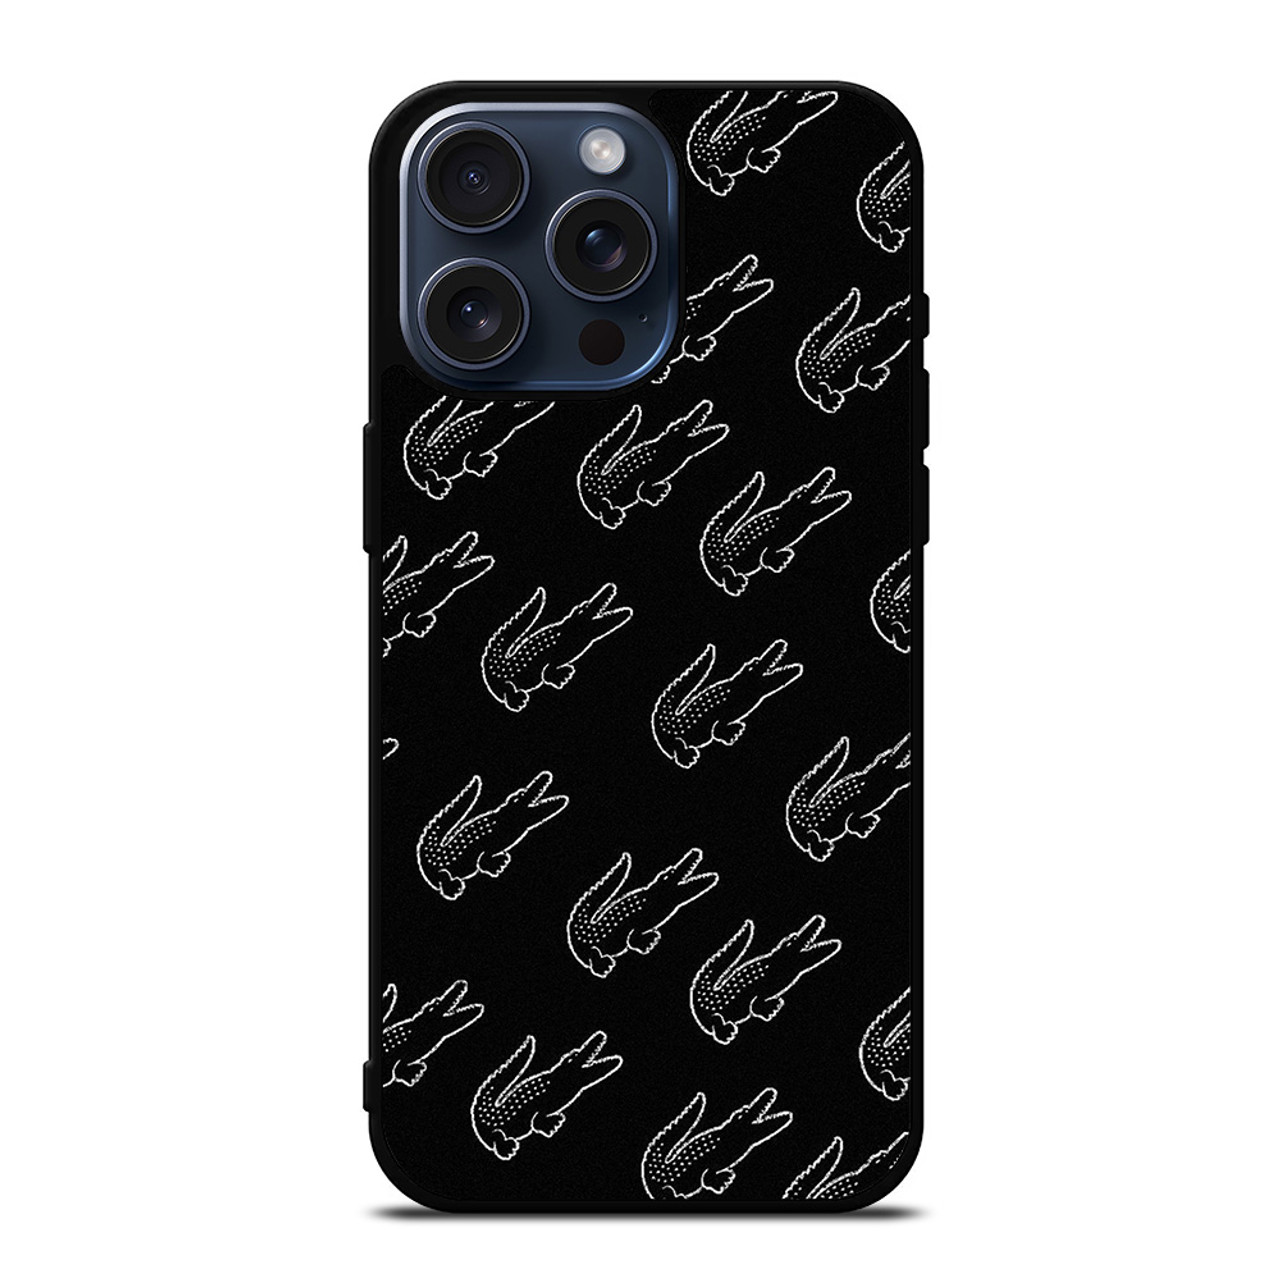 LACOSTE LOGO iPhone 12 Pro Max Case Cover